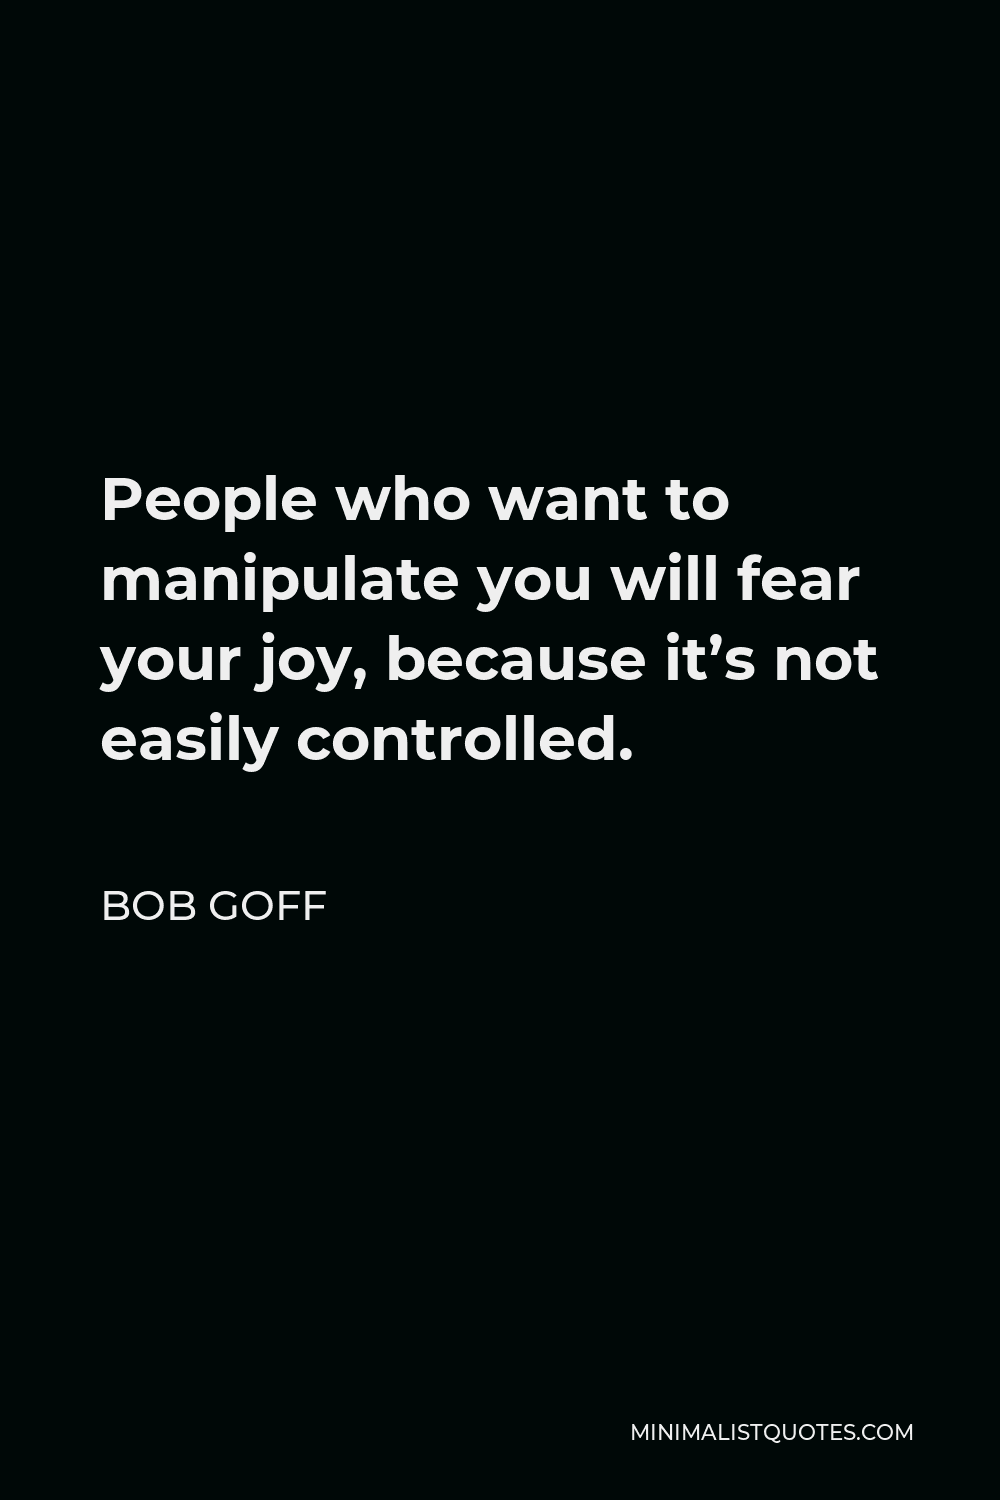 Bob Goff Quote - People who want to manipulate you will fear your joy, because it’s not easily controlled.